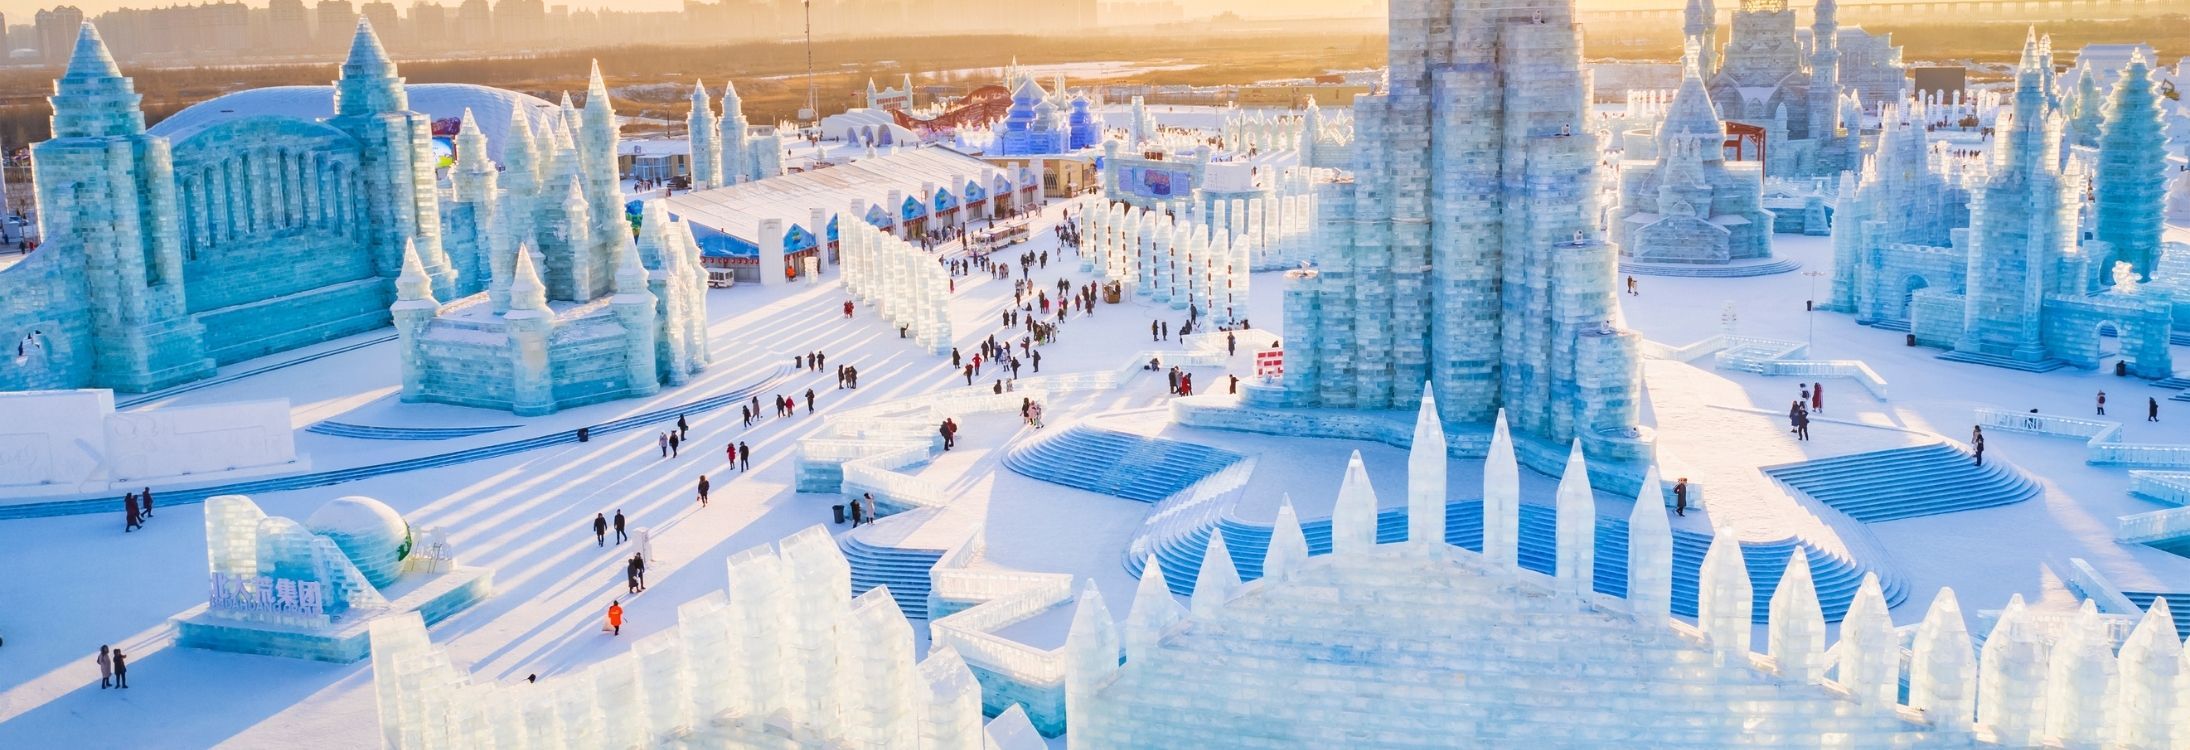 World's largest ice and snow festival - China